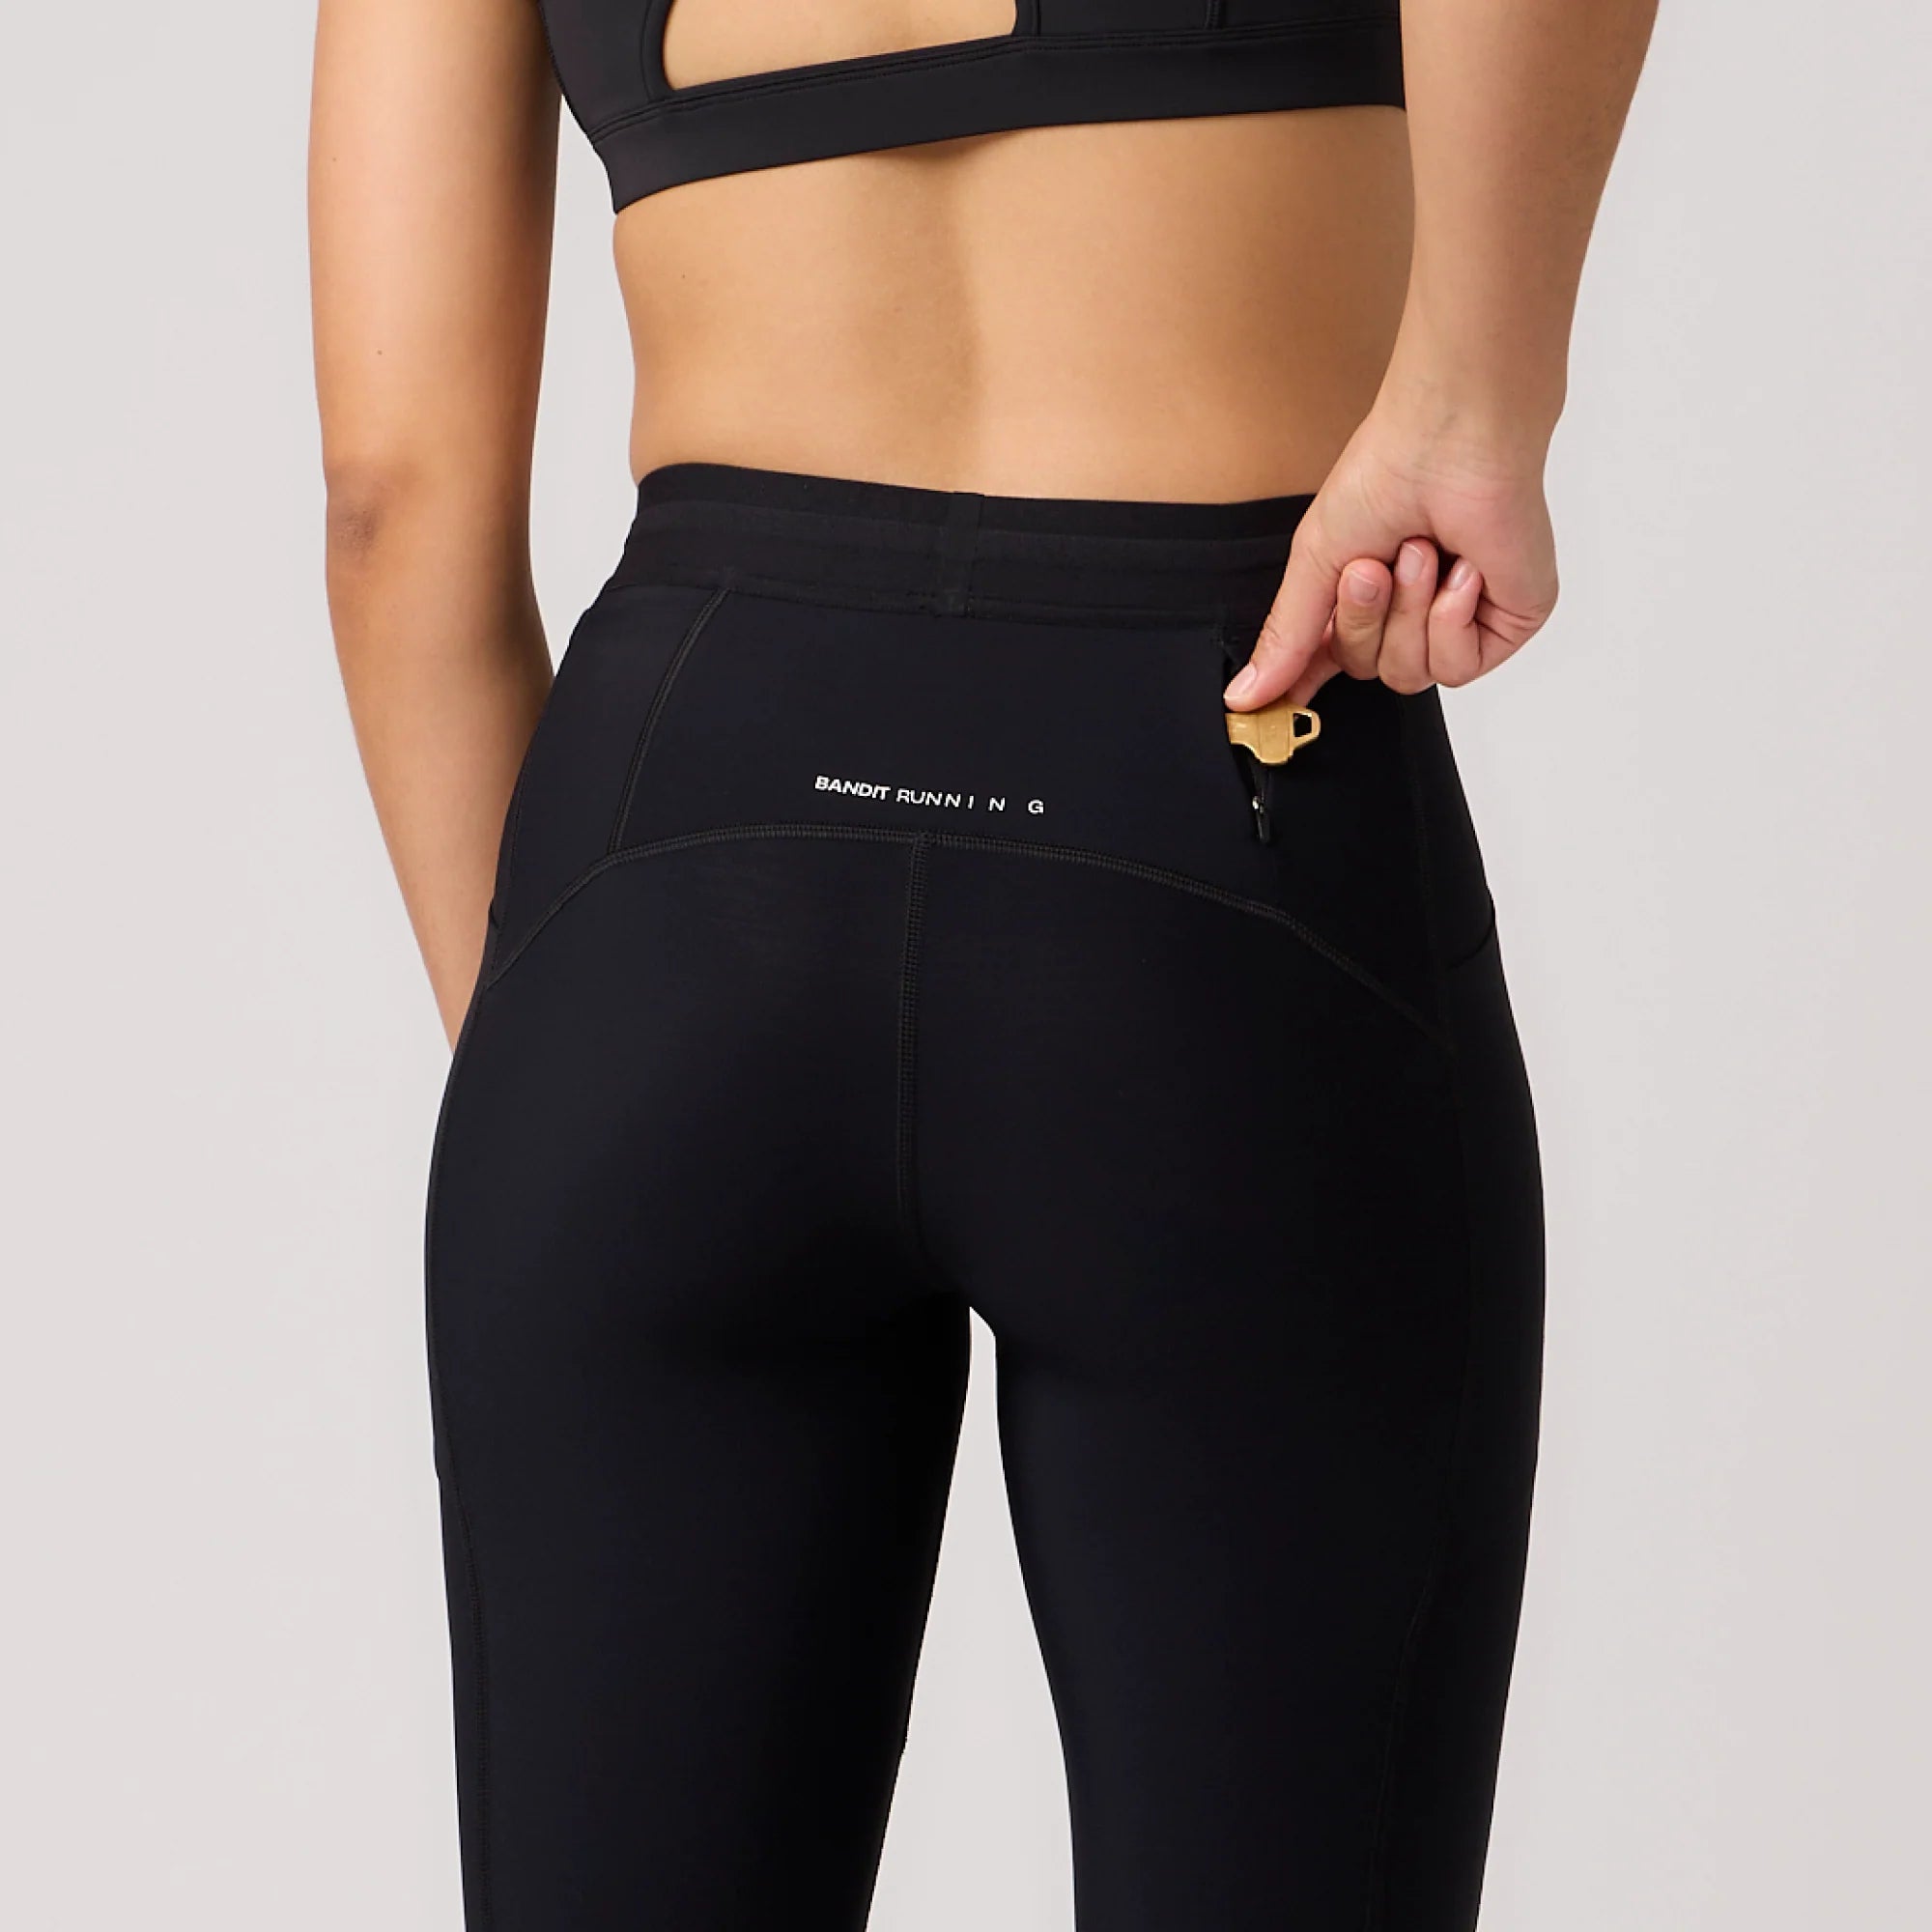  Cold Weather Running Tights